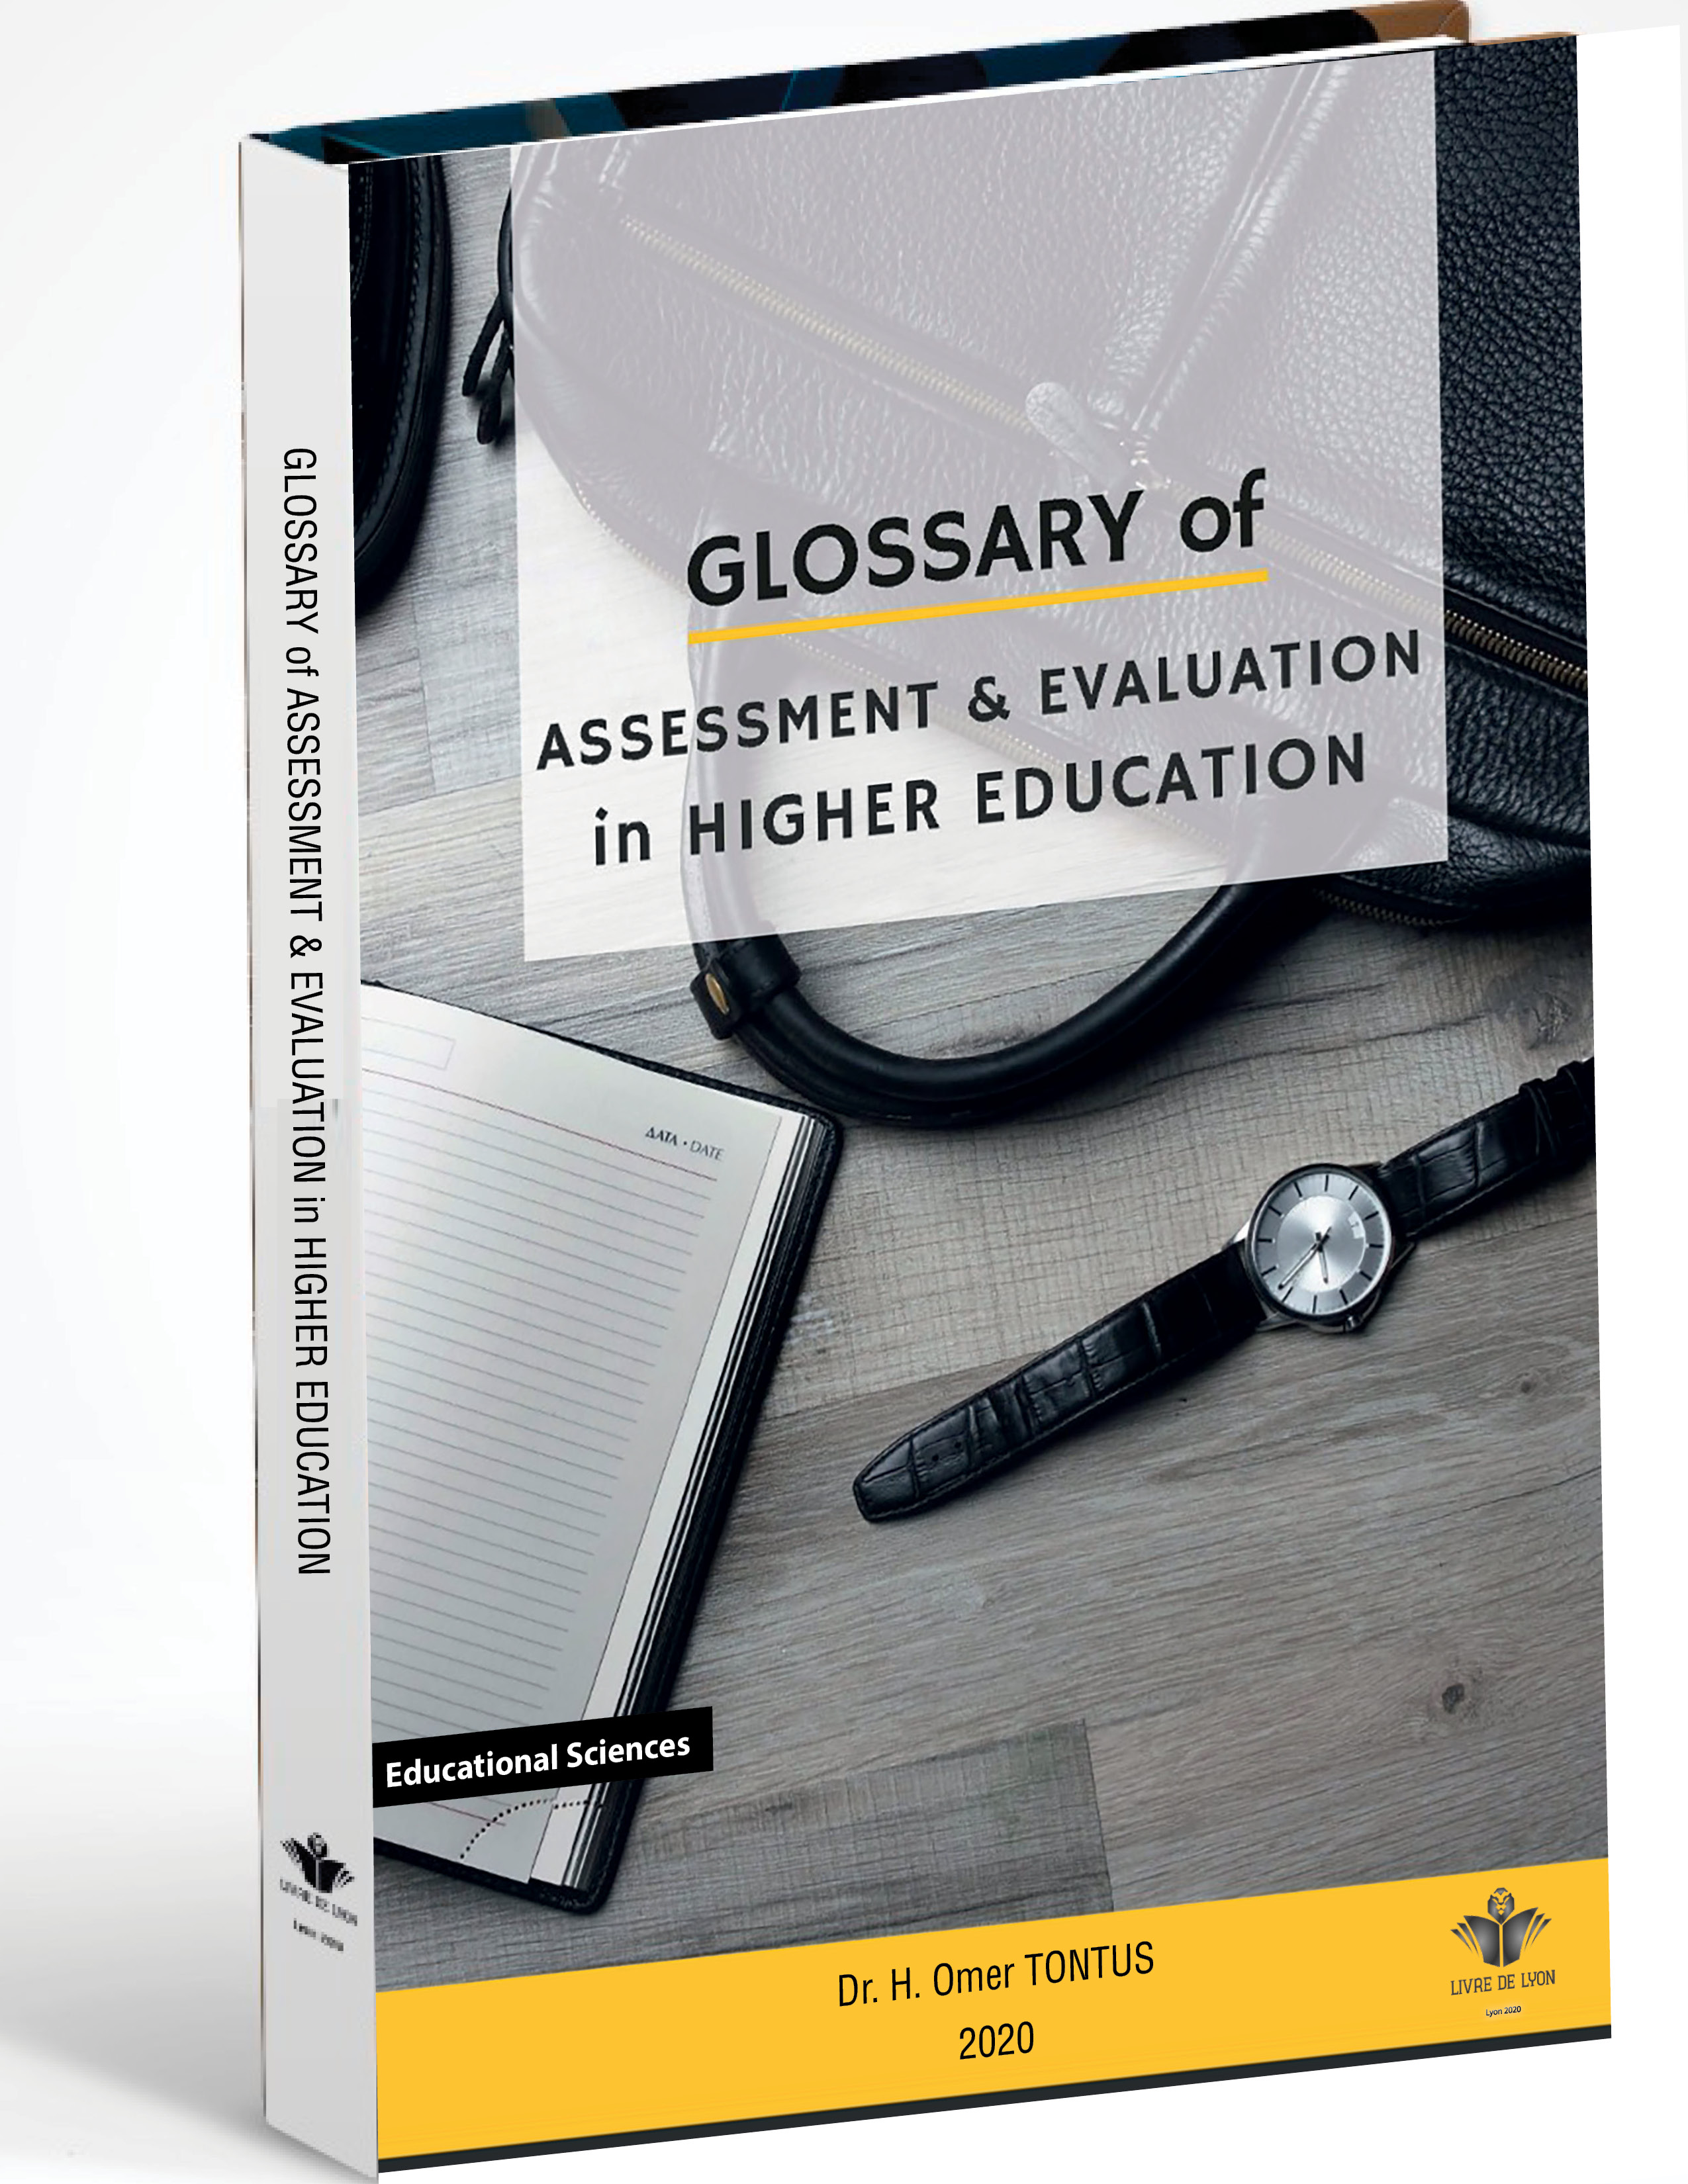 Glossary of Assessment & Evaluation in Higher Education